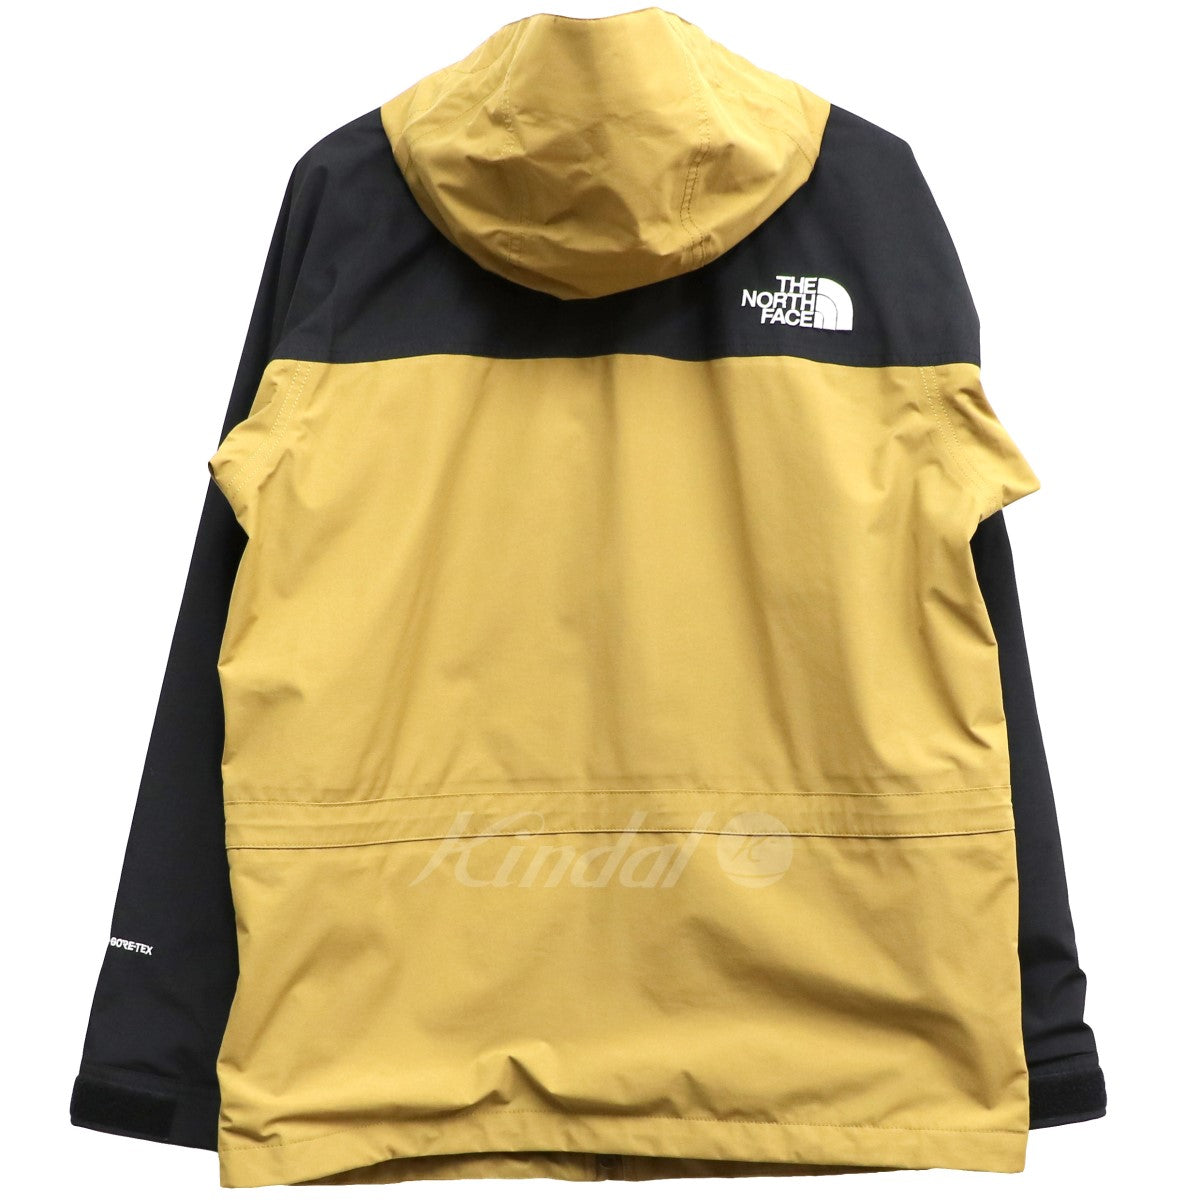 THE NORTH FACE(ザノースフェイス) 19AW Mountain Light Jacket GORE 